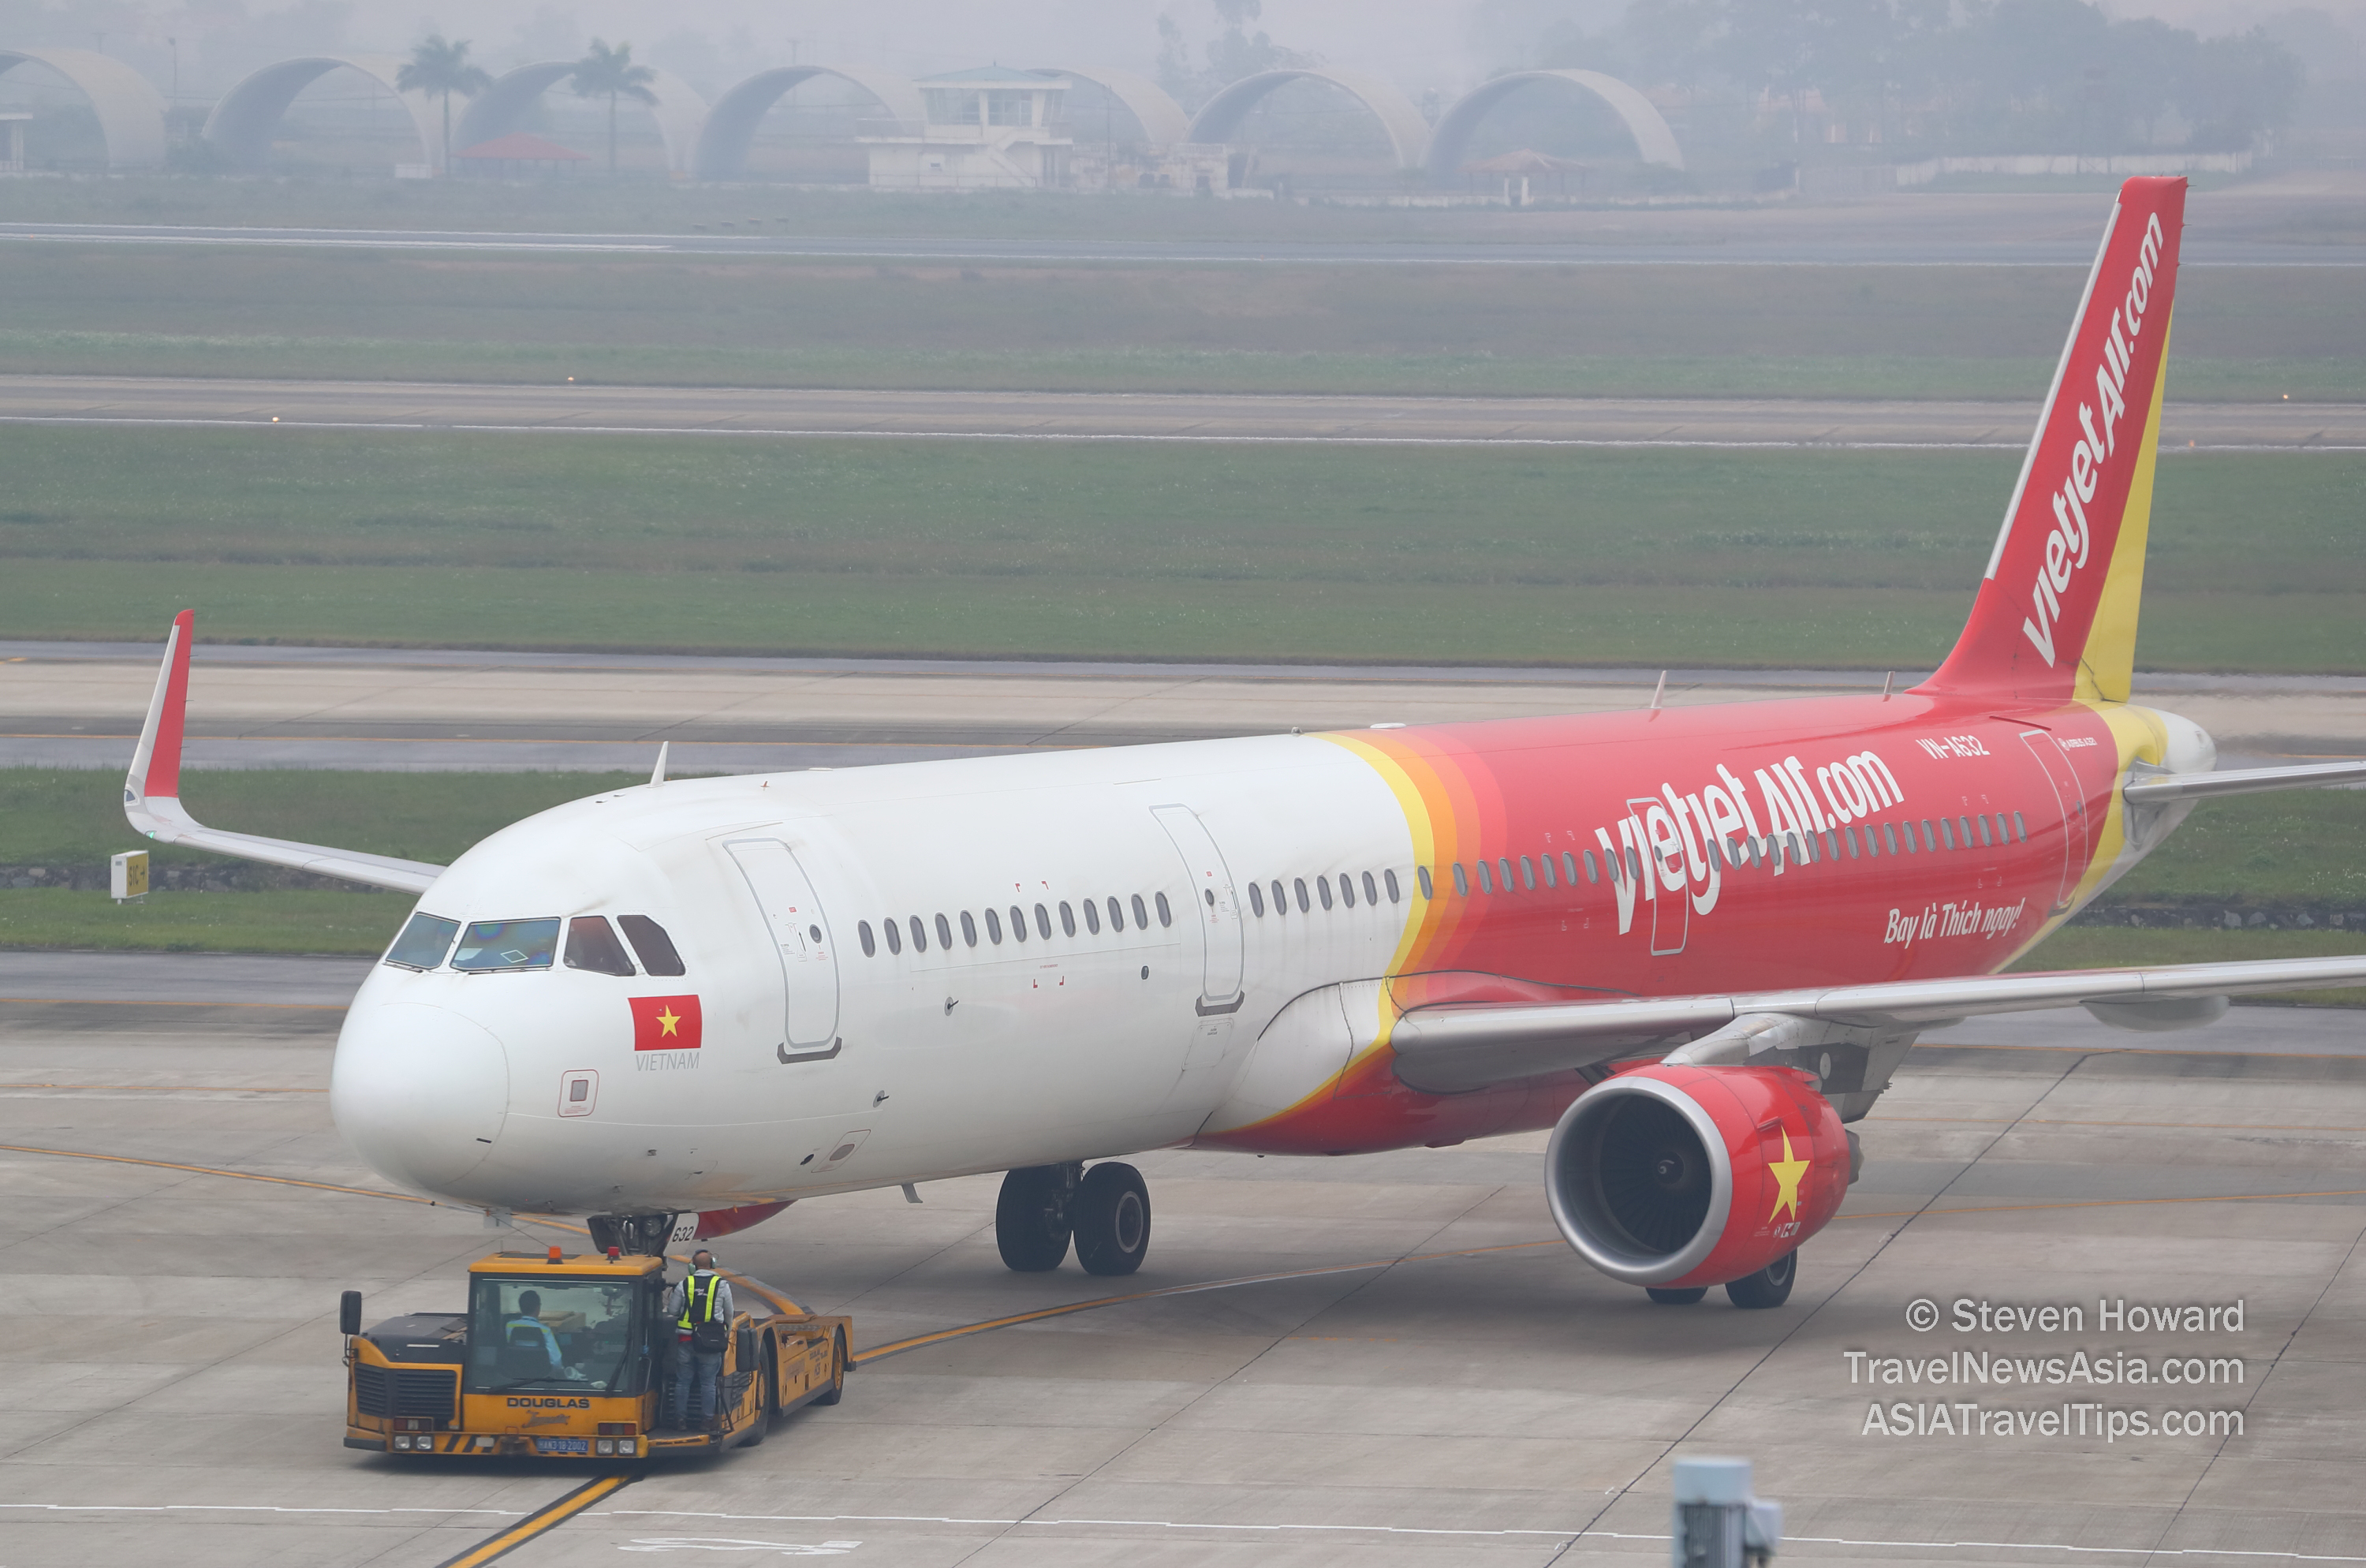 Vietjet Airbus A320 reg: VN-A632. Picture by Steven Howard of TravelNewsAsia.com Click to enlarge.